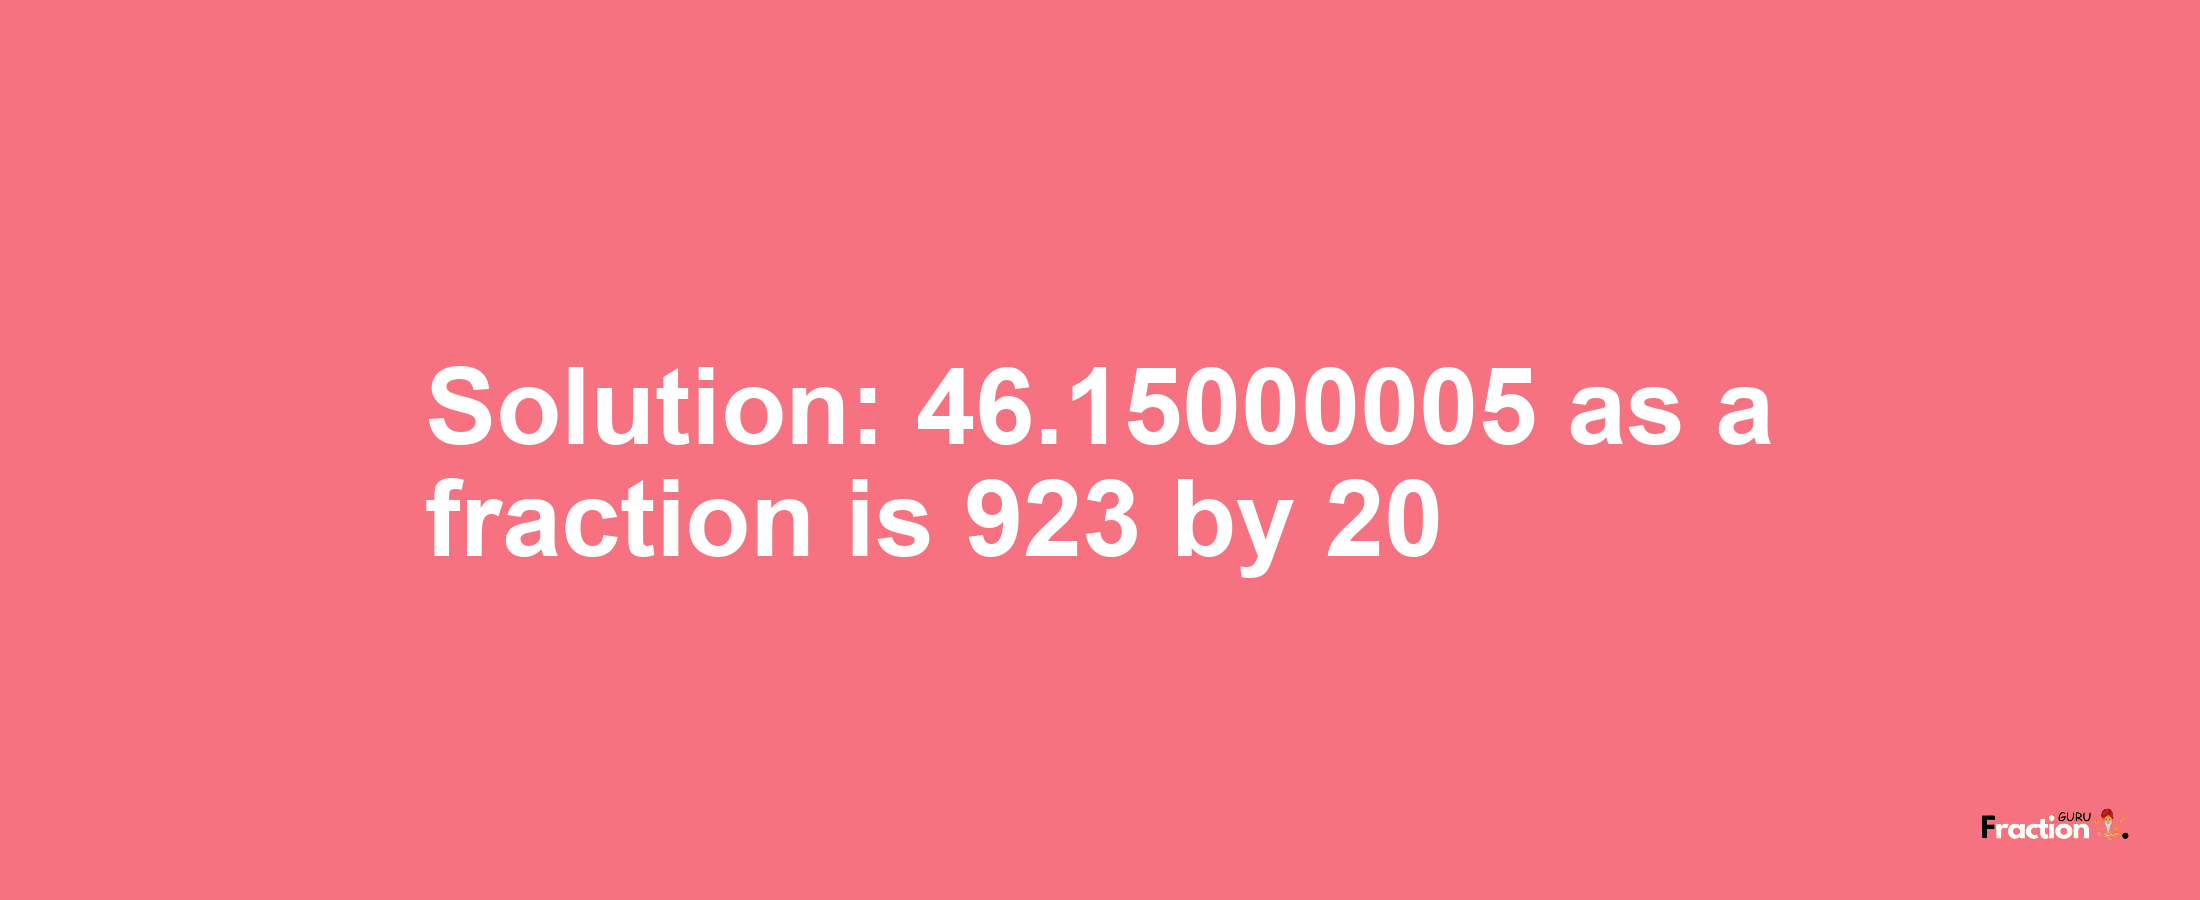 Solution:46.15000005 as a fraction is 923/20